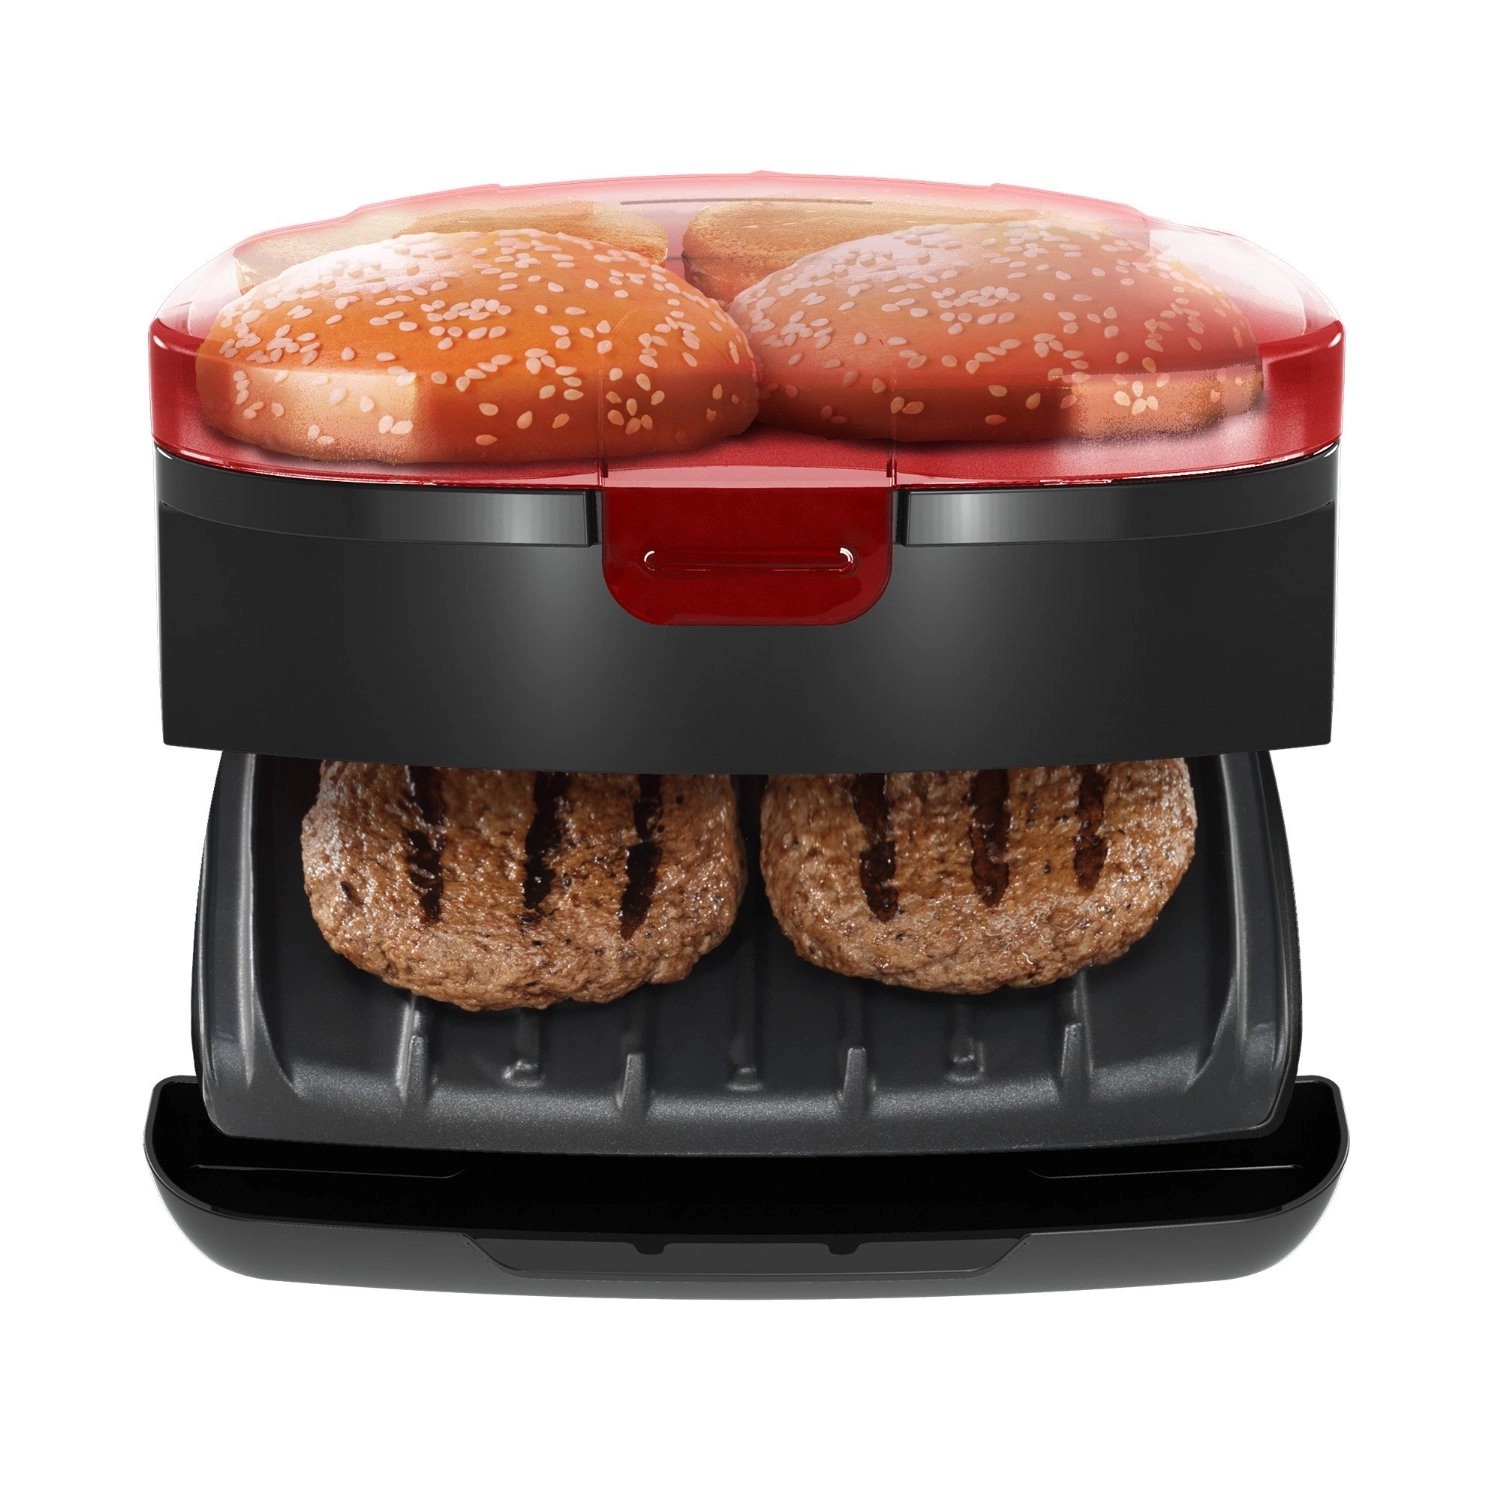 How Long To Cook Frozen Burgers On George Foreman Grill